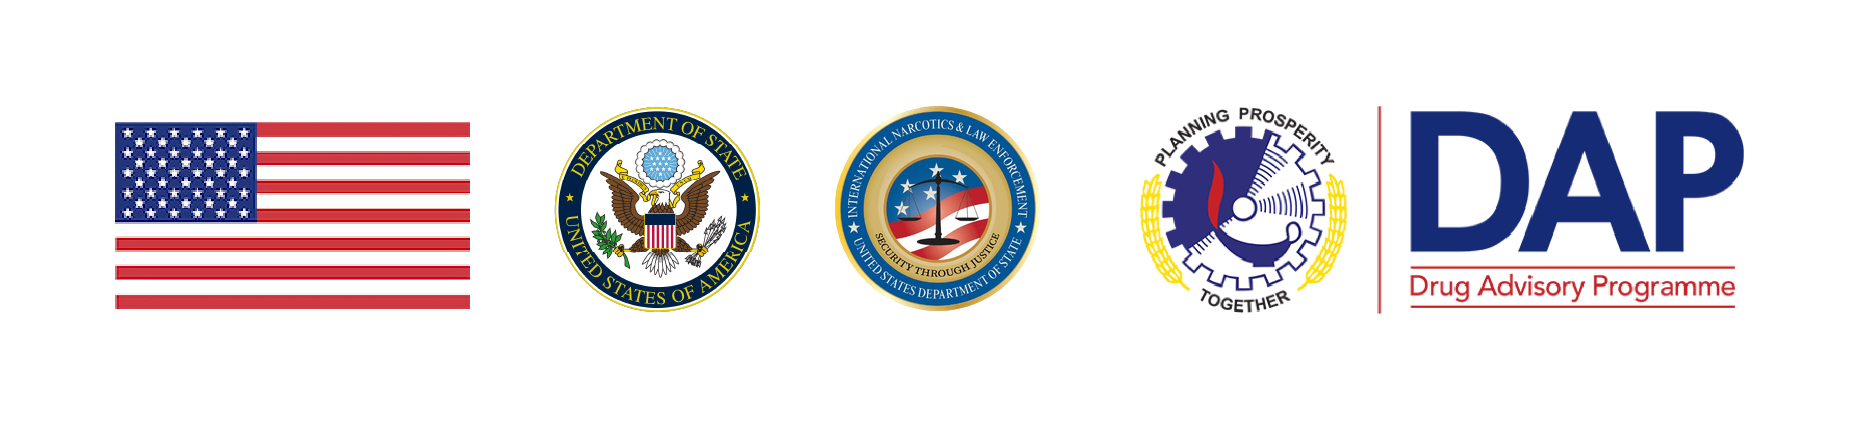 U.S. Department of State and The Colombo Plan Drug Advisory Programme logos